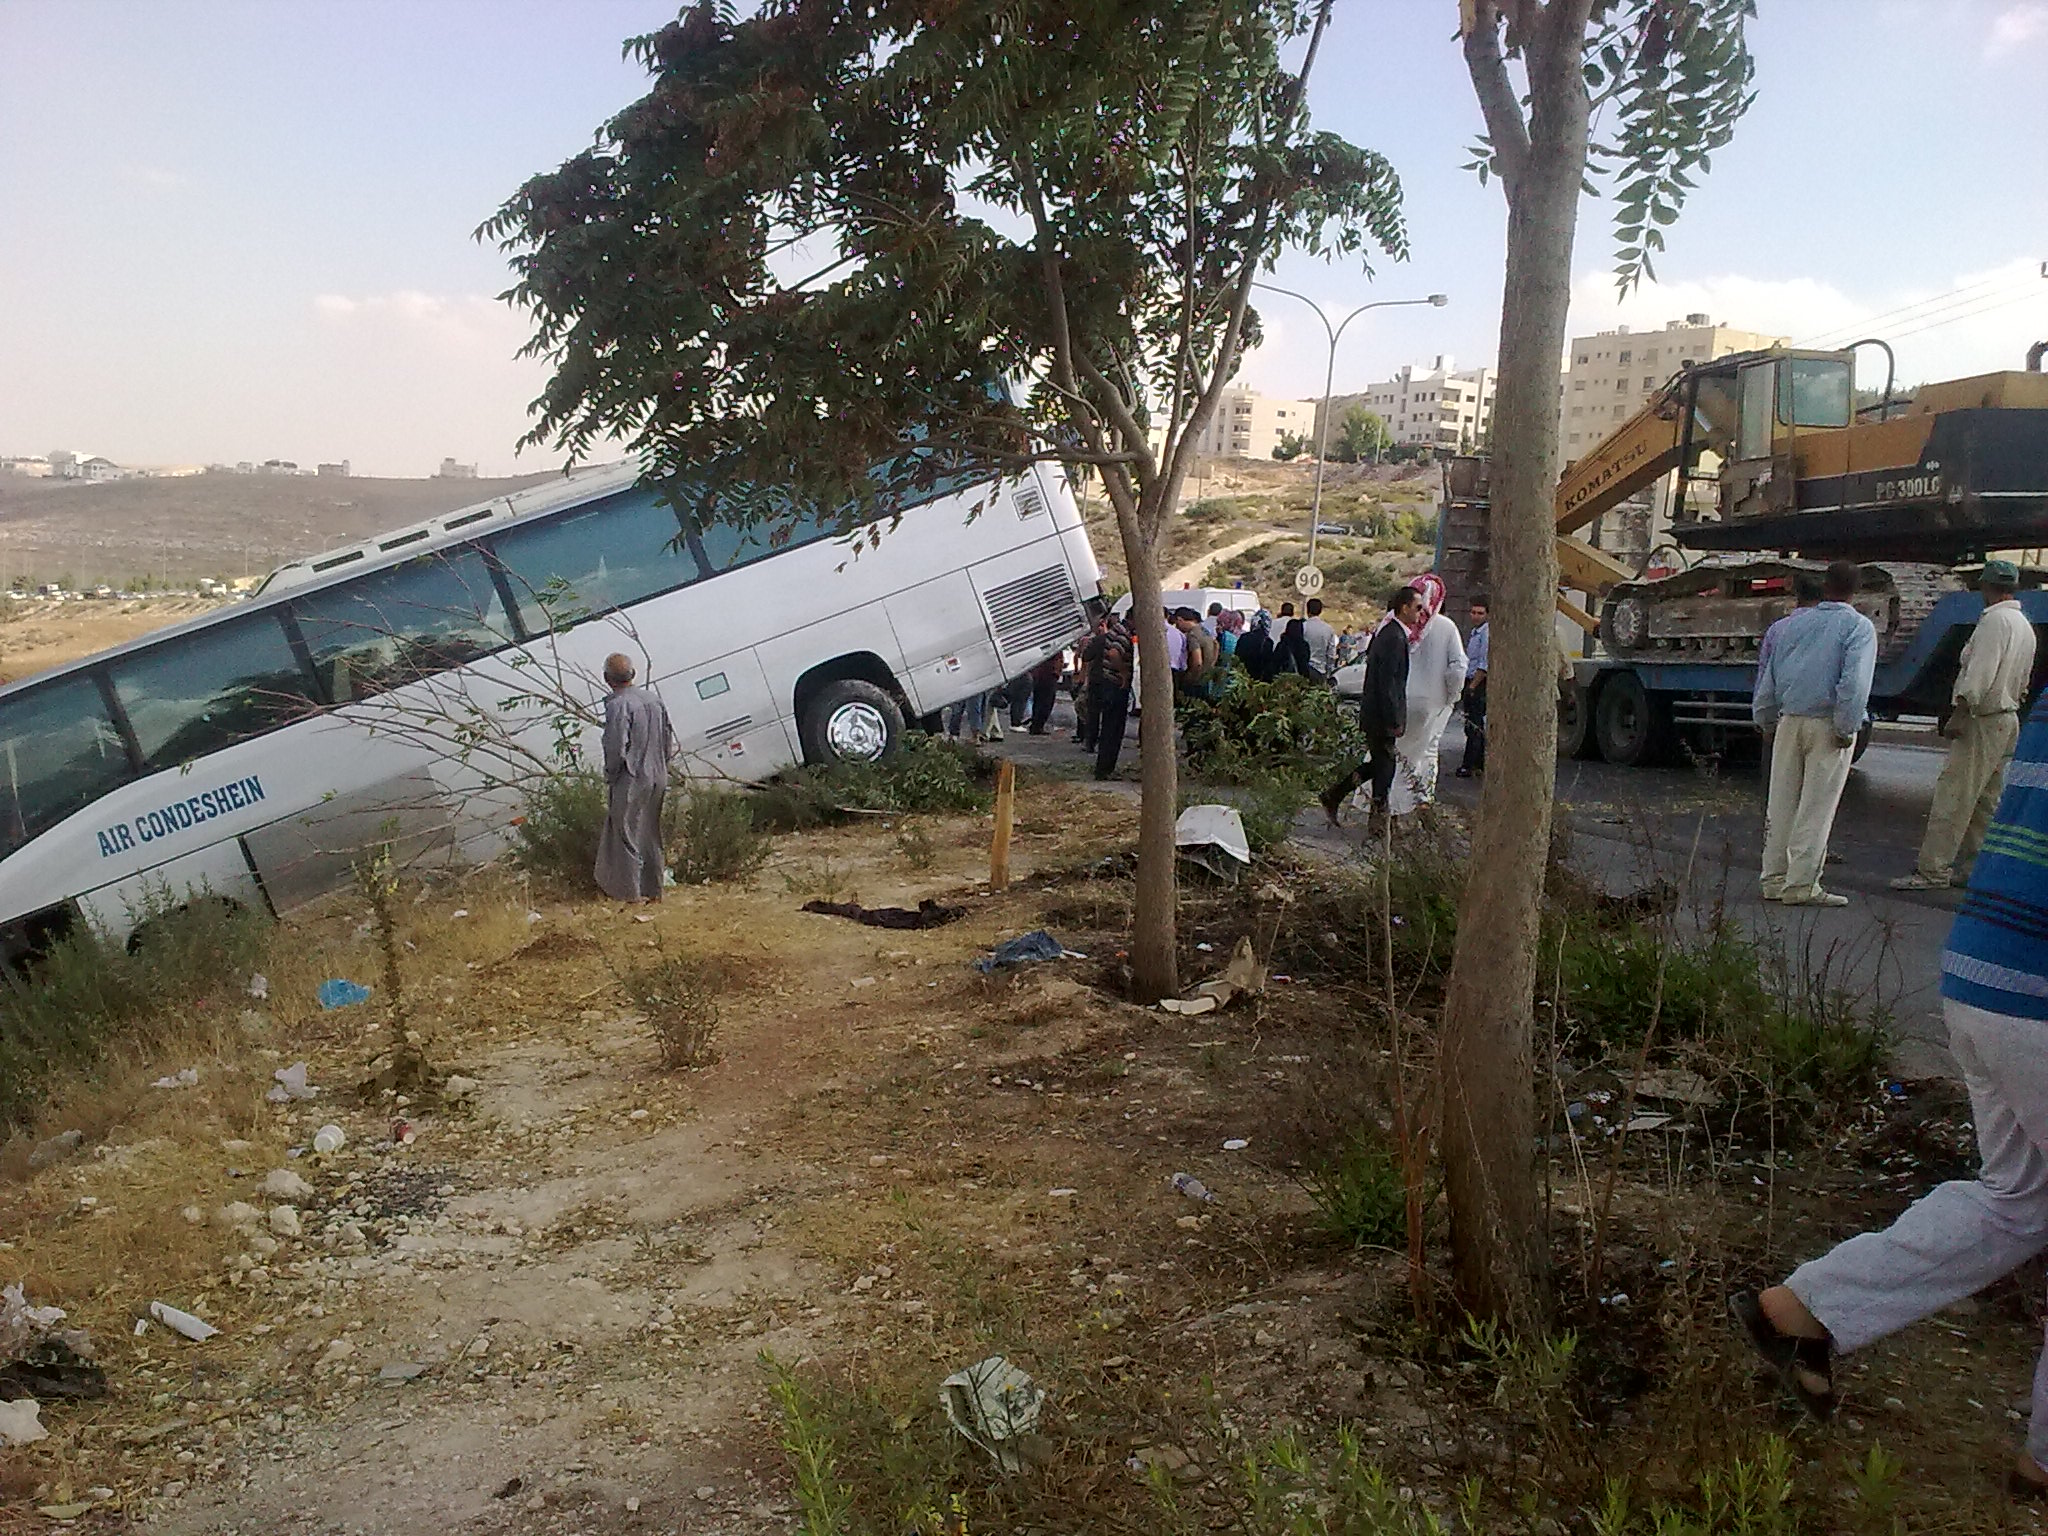 Bus Fell Into Gorge From India Border